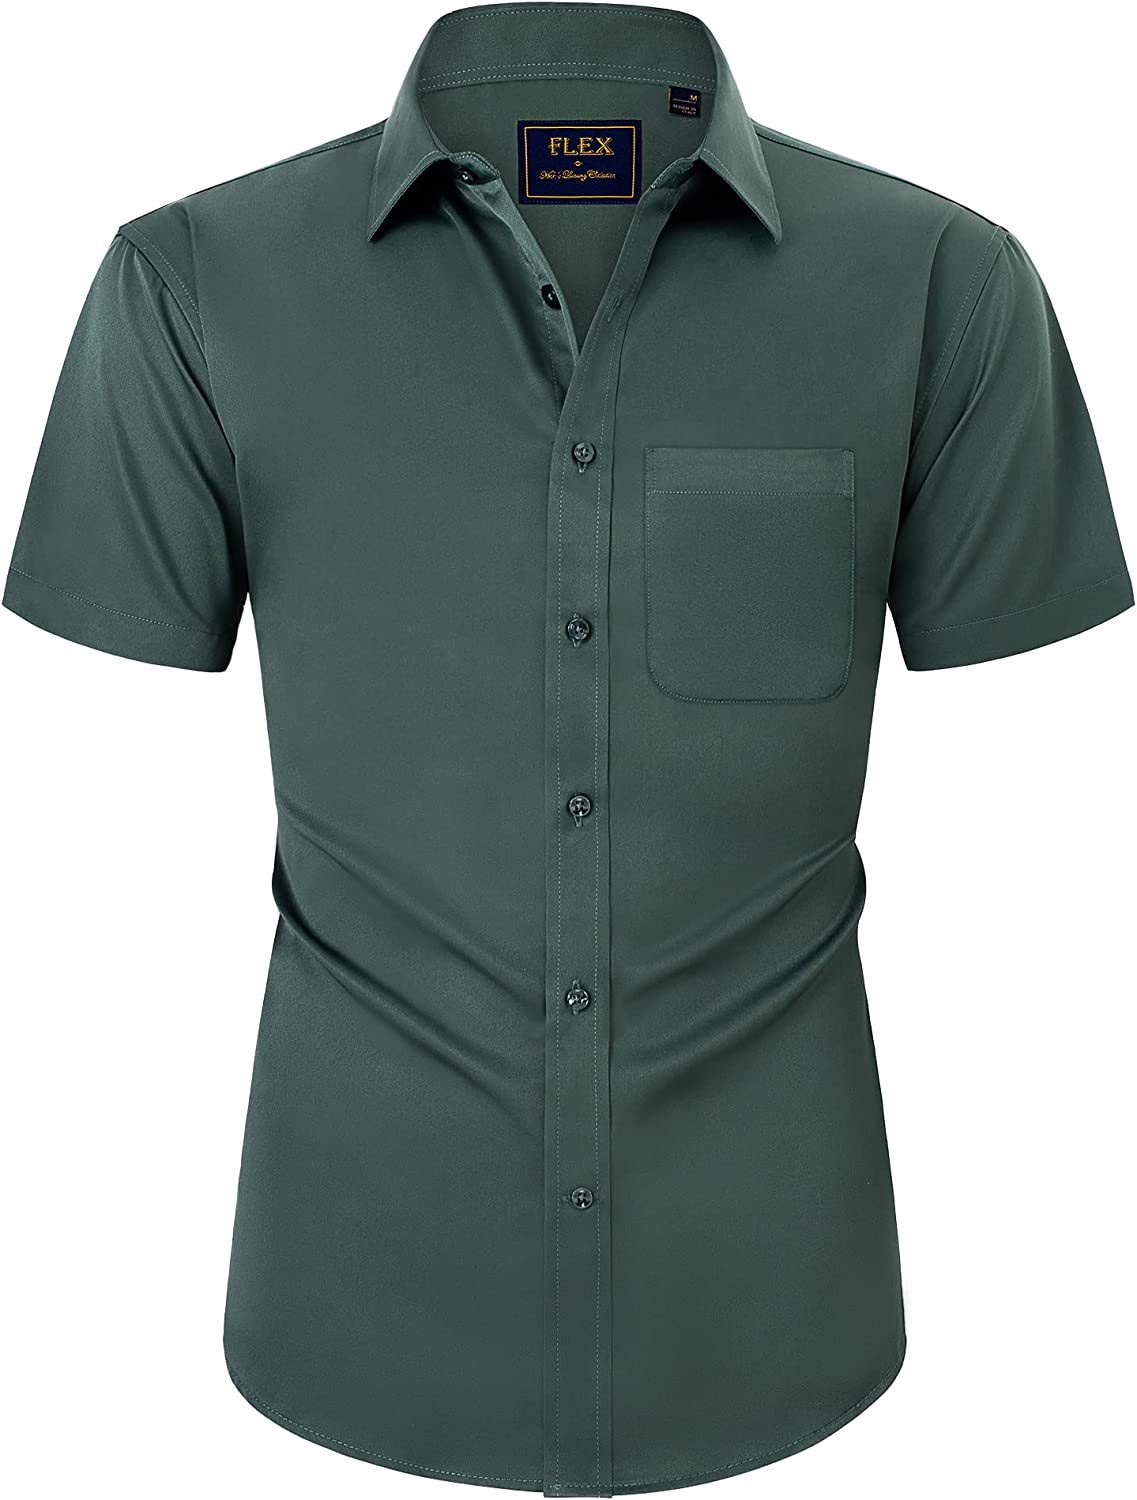 Alimens & Gentle Men's Short Sleeve Fishing Shirts with Pockets Wicking  Fabric Outdoor Shirt